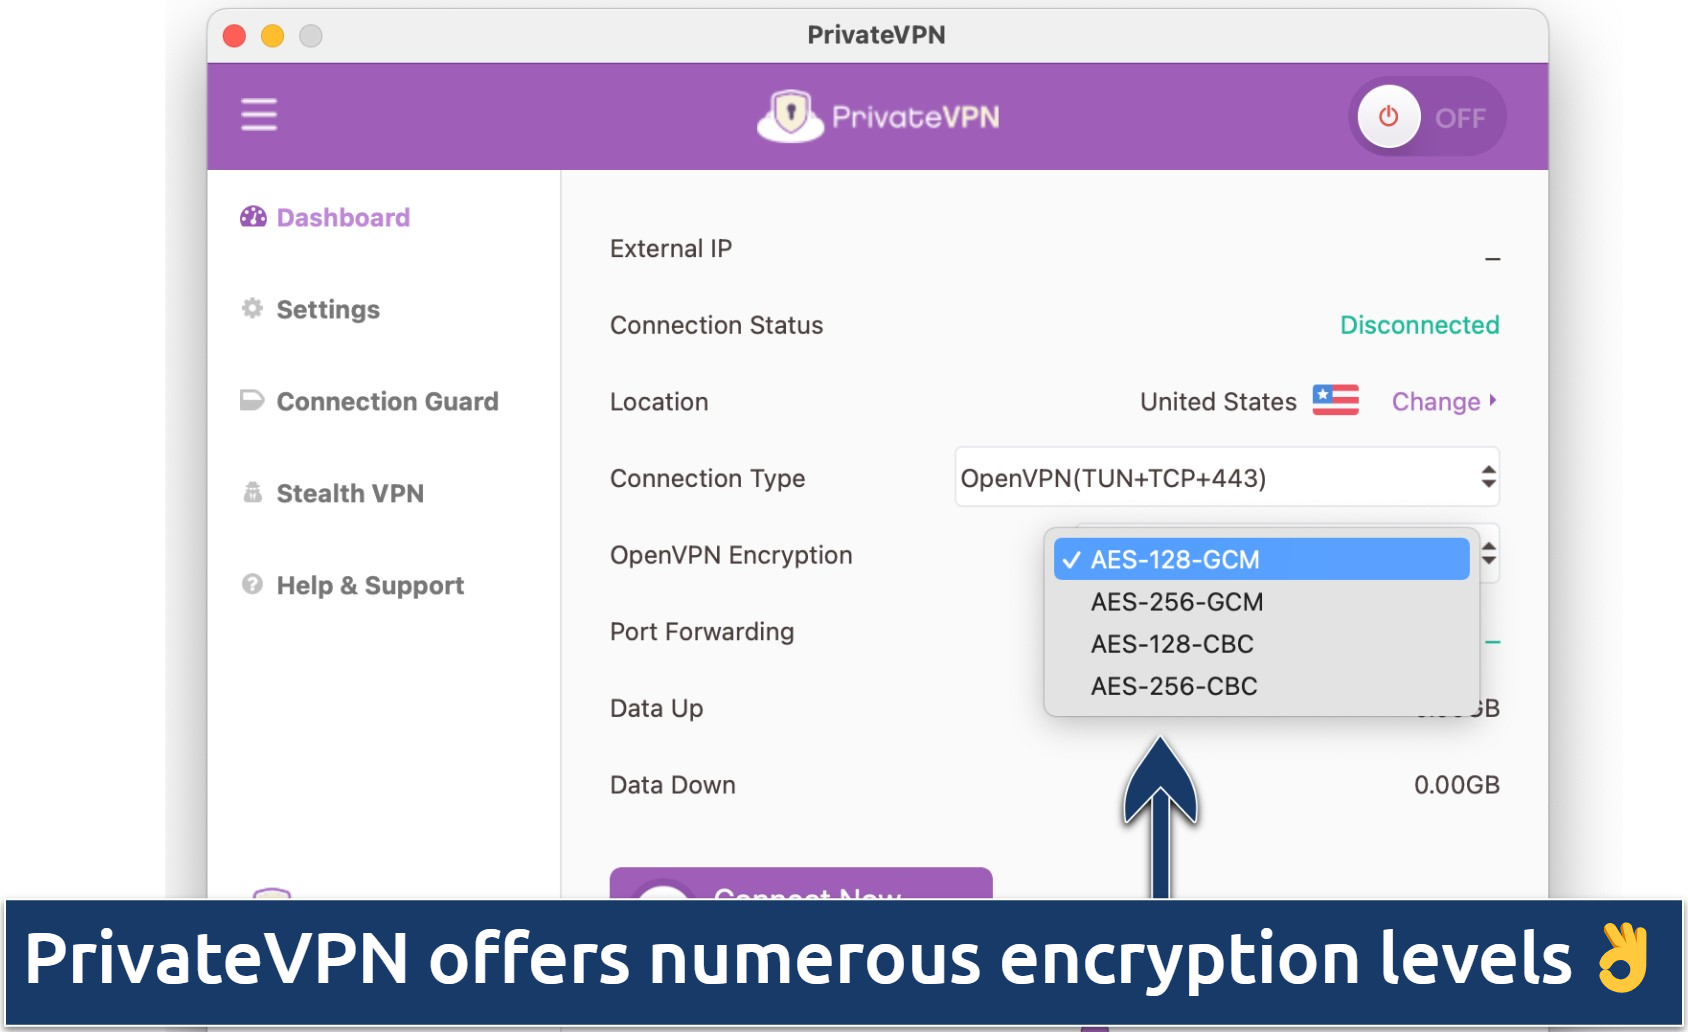 Screenshot of the Dashboard panel of PrivateVPN's Advanced view